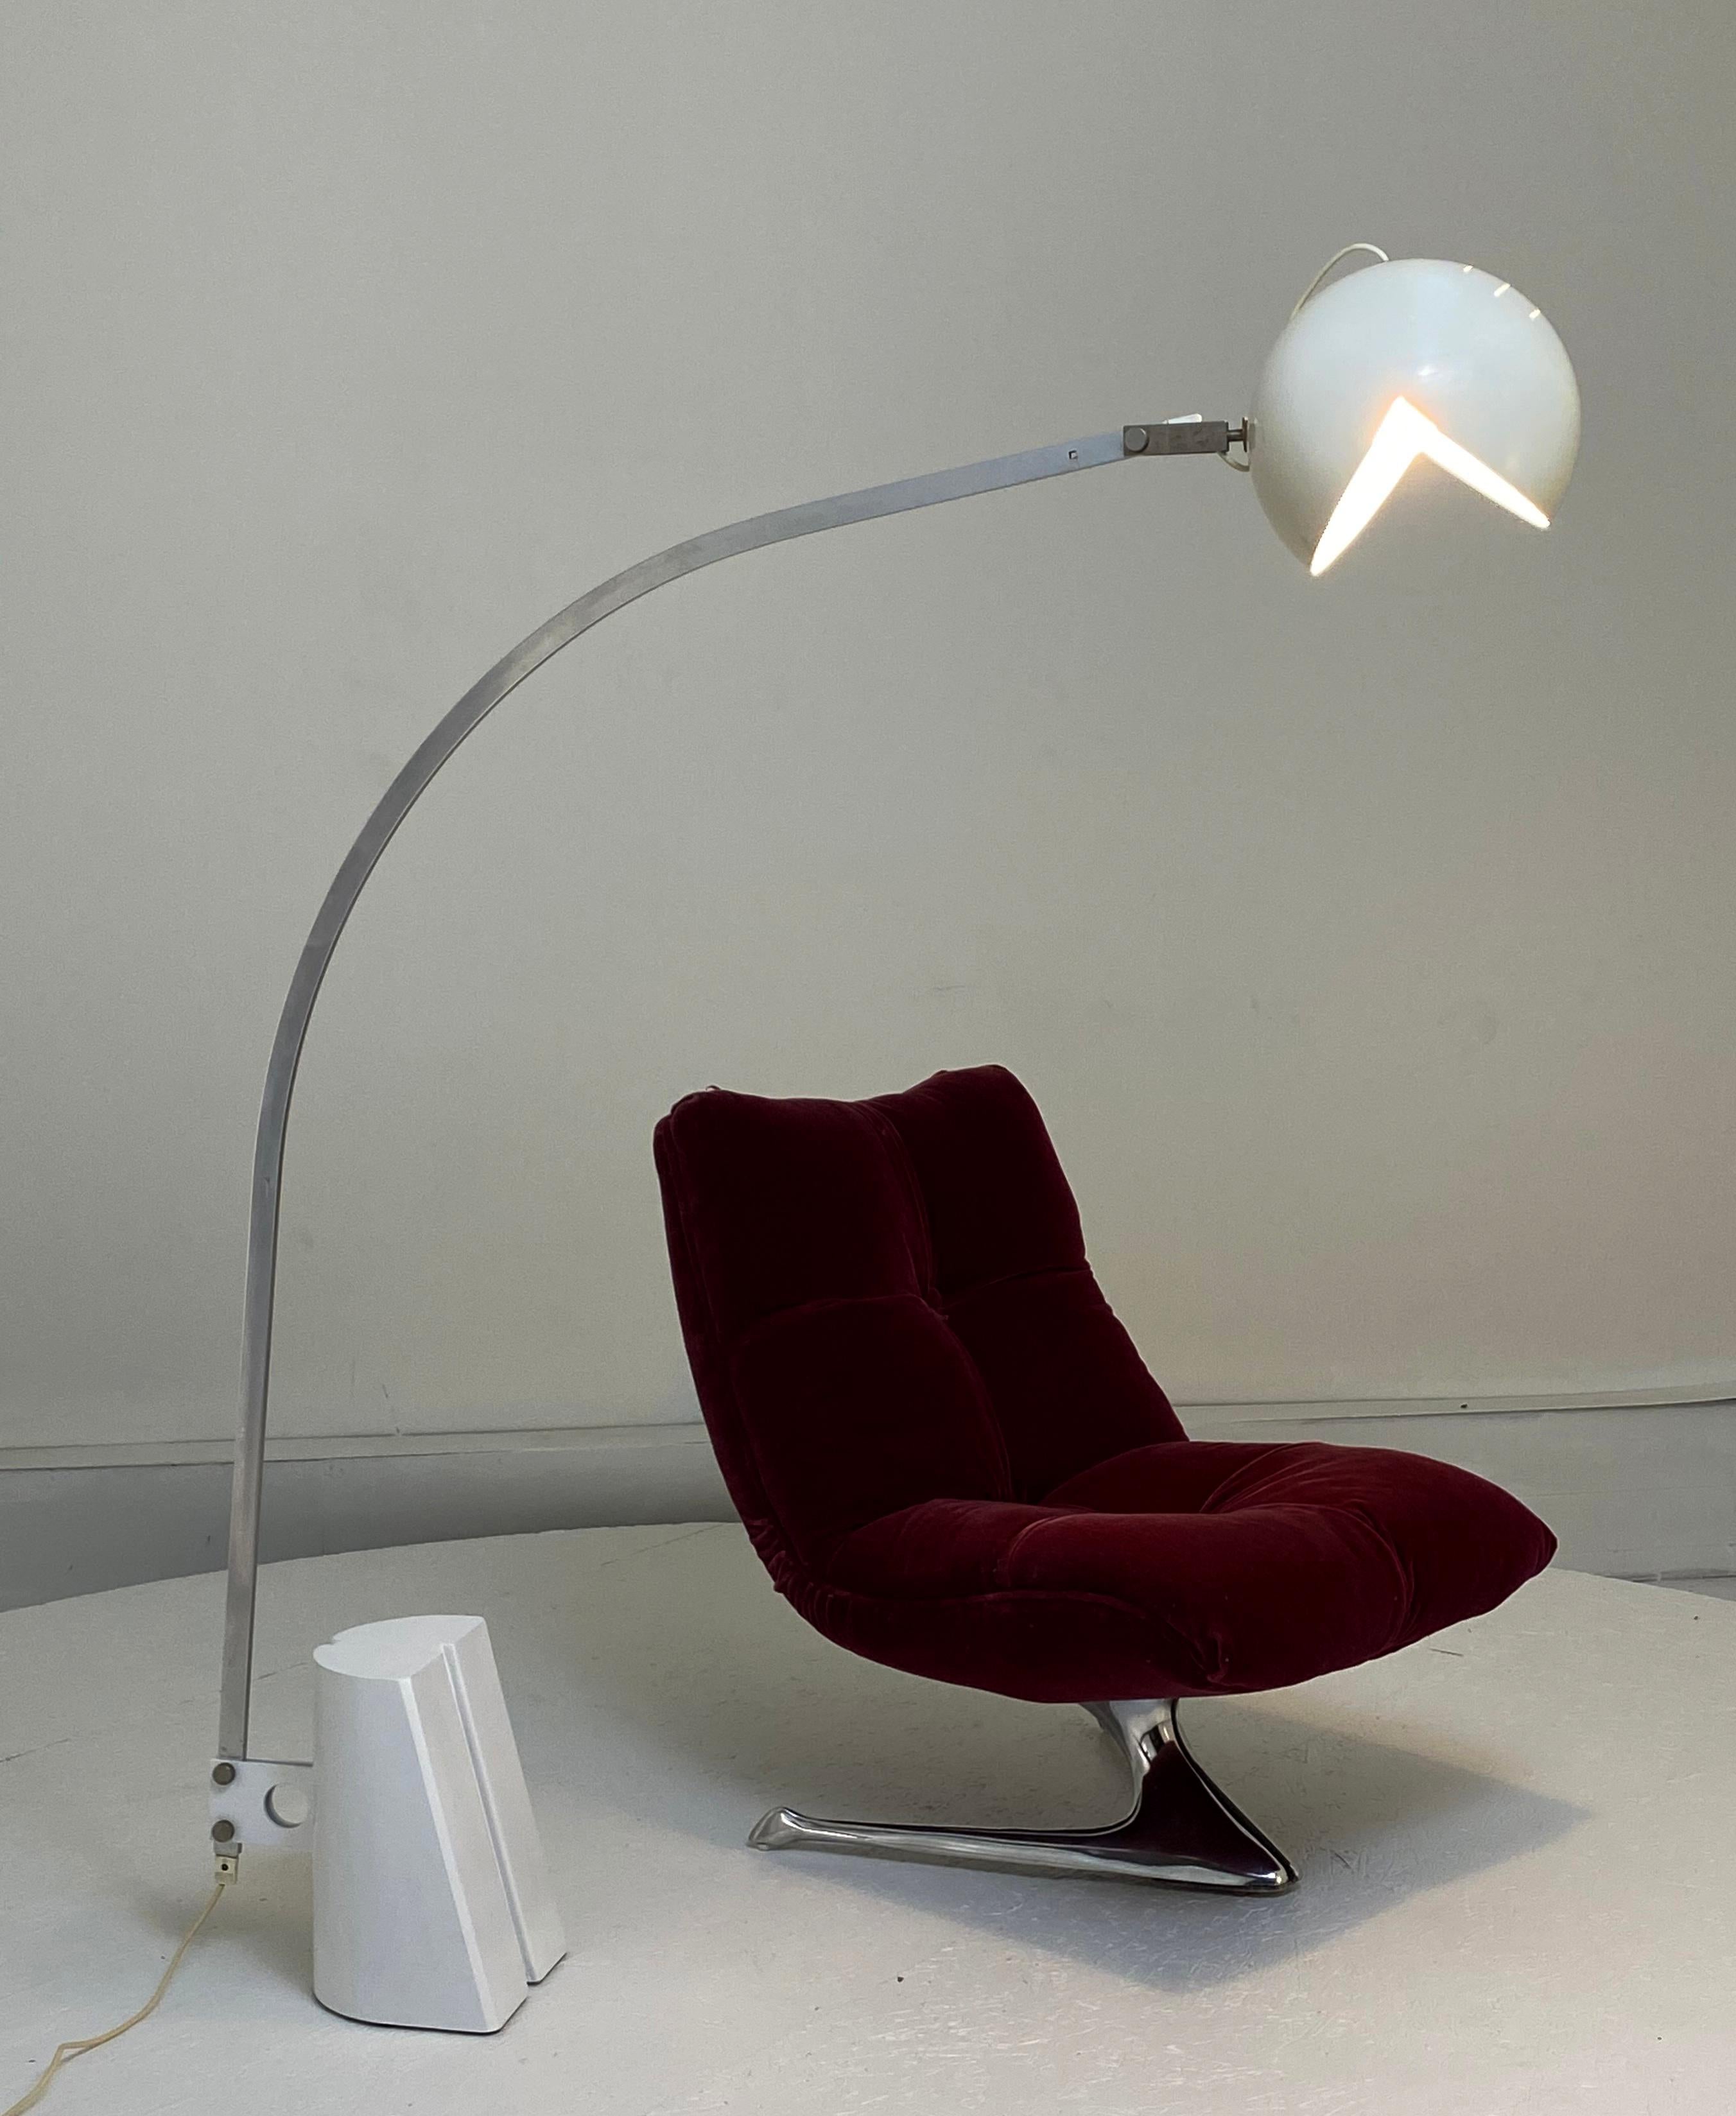 Ill-Form floor lamp , Italy, circa 1965. Measures: 48 W x 11.5 D x 63 H inches
aluminum, enameled aluminum, enameled steel, brass
The name ill-form probably stands for an abbreviation of 